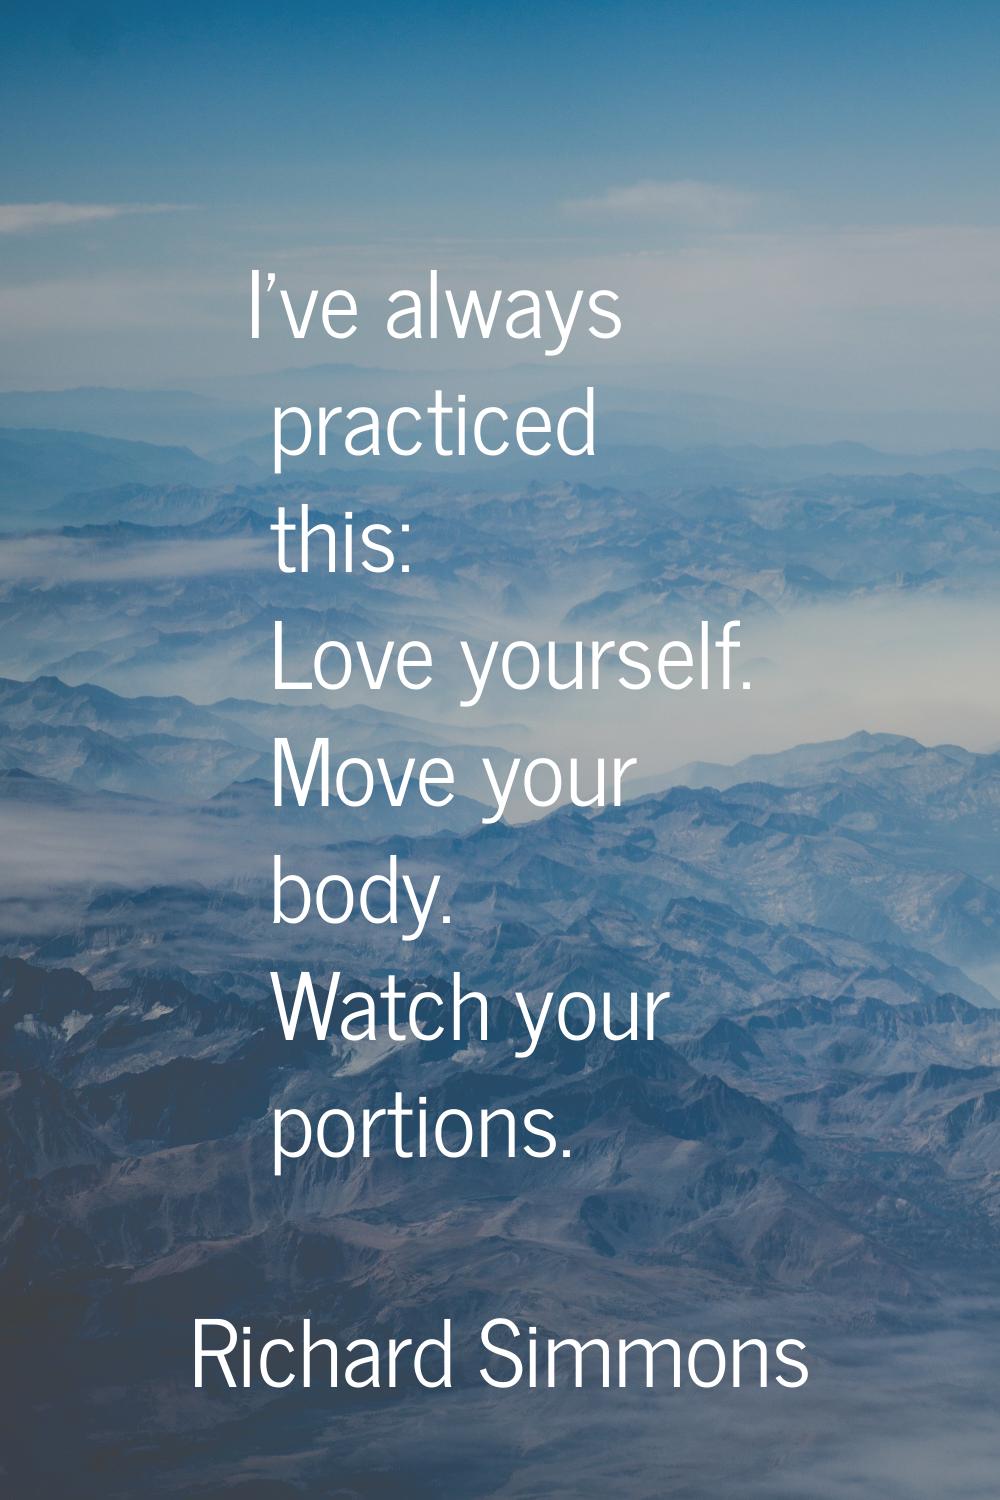 I've always practiced this: Love yourself. Move your body. Watch your portions.